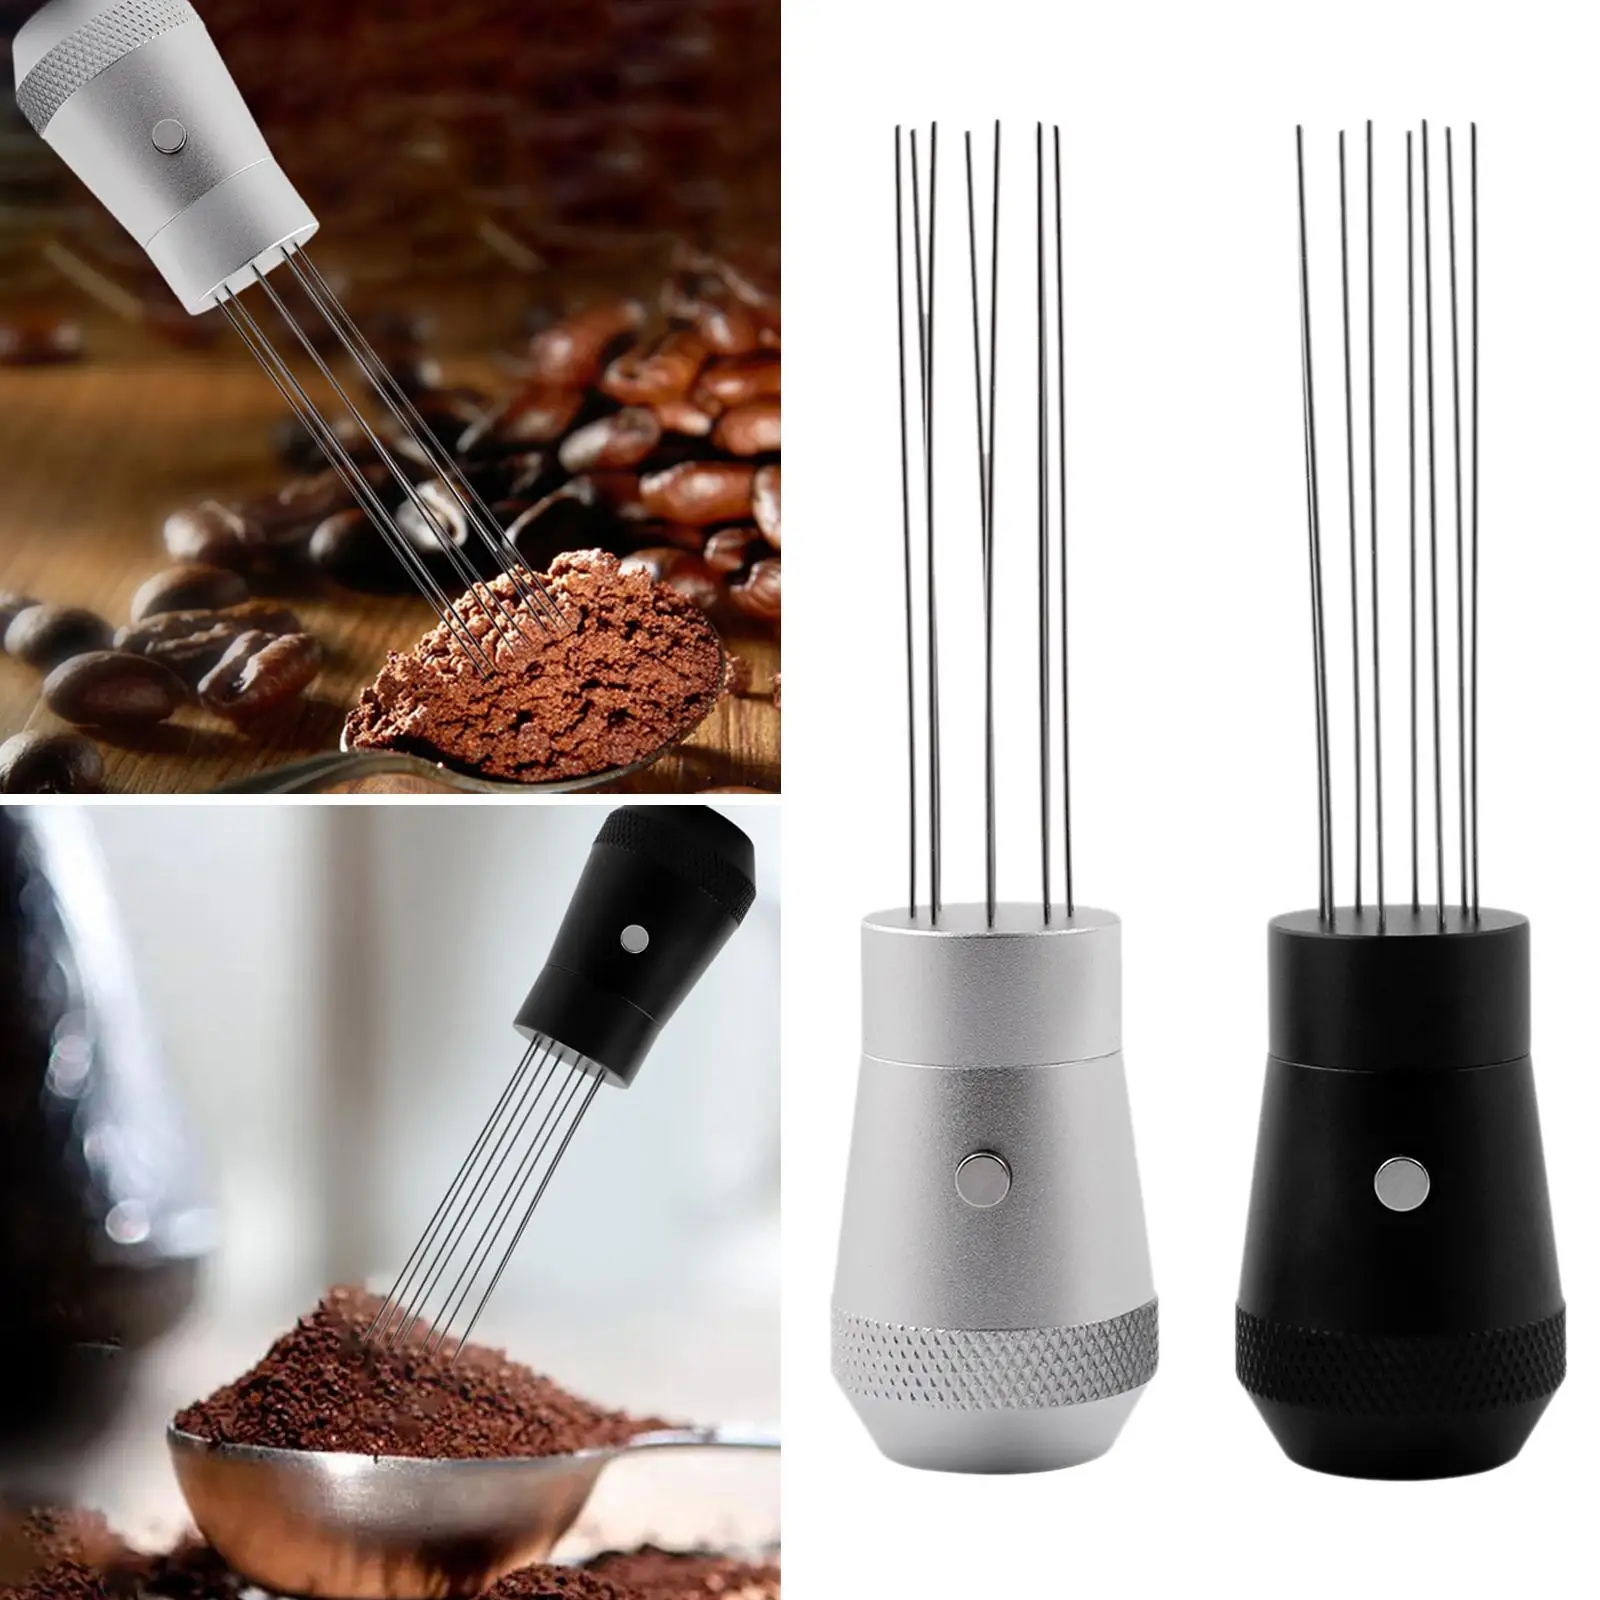 Coffee Stirrer Tool Anti Slip Aluminium Alloy with 8 Stainless Steel Pins